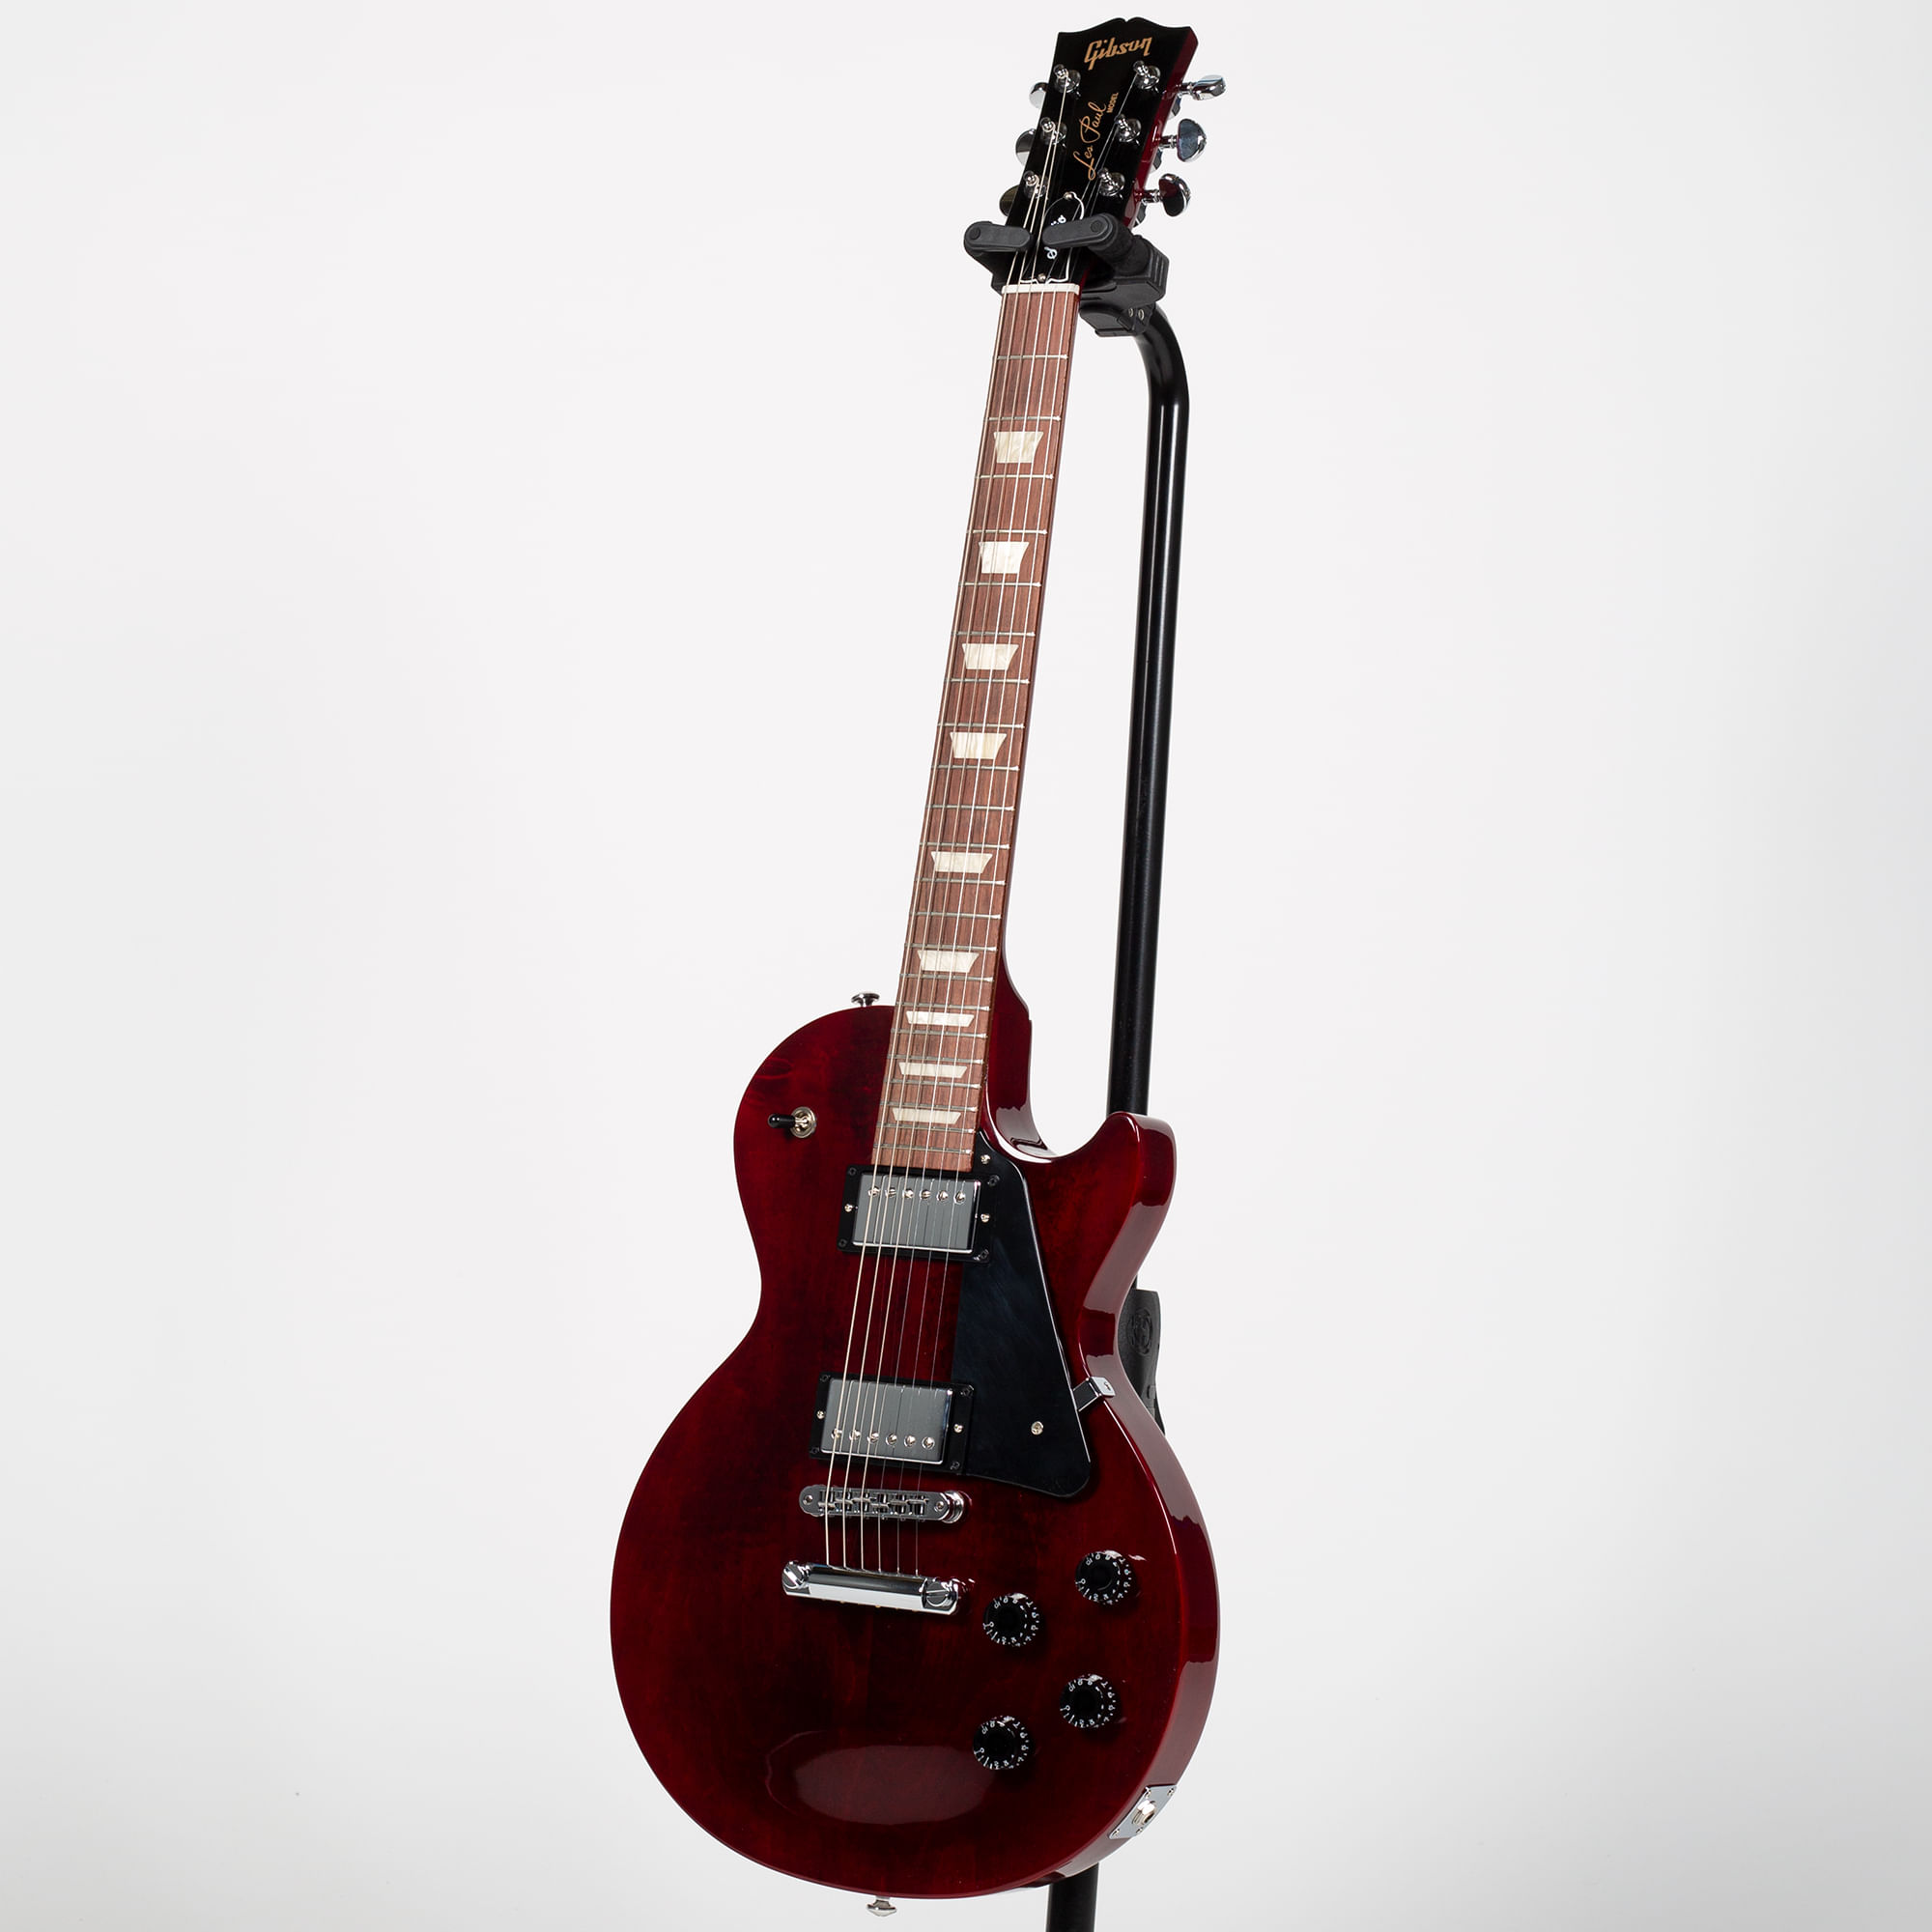 Warrior Artist piano Gibson Les Paul Studio Electric Guitar - Wine Red - Cosmo Music